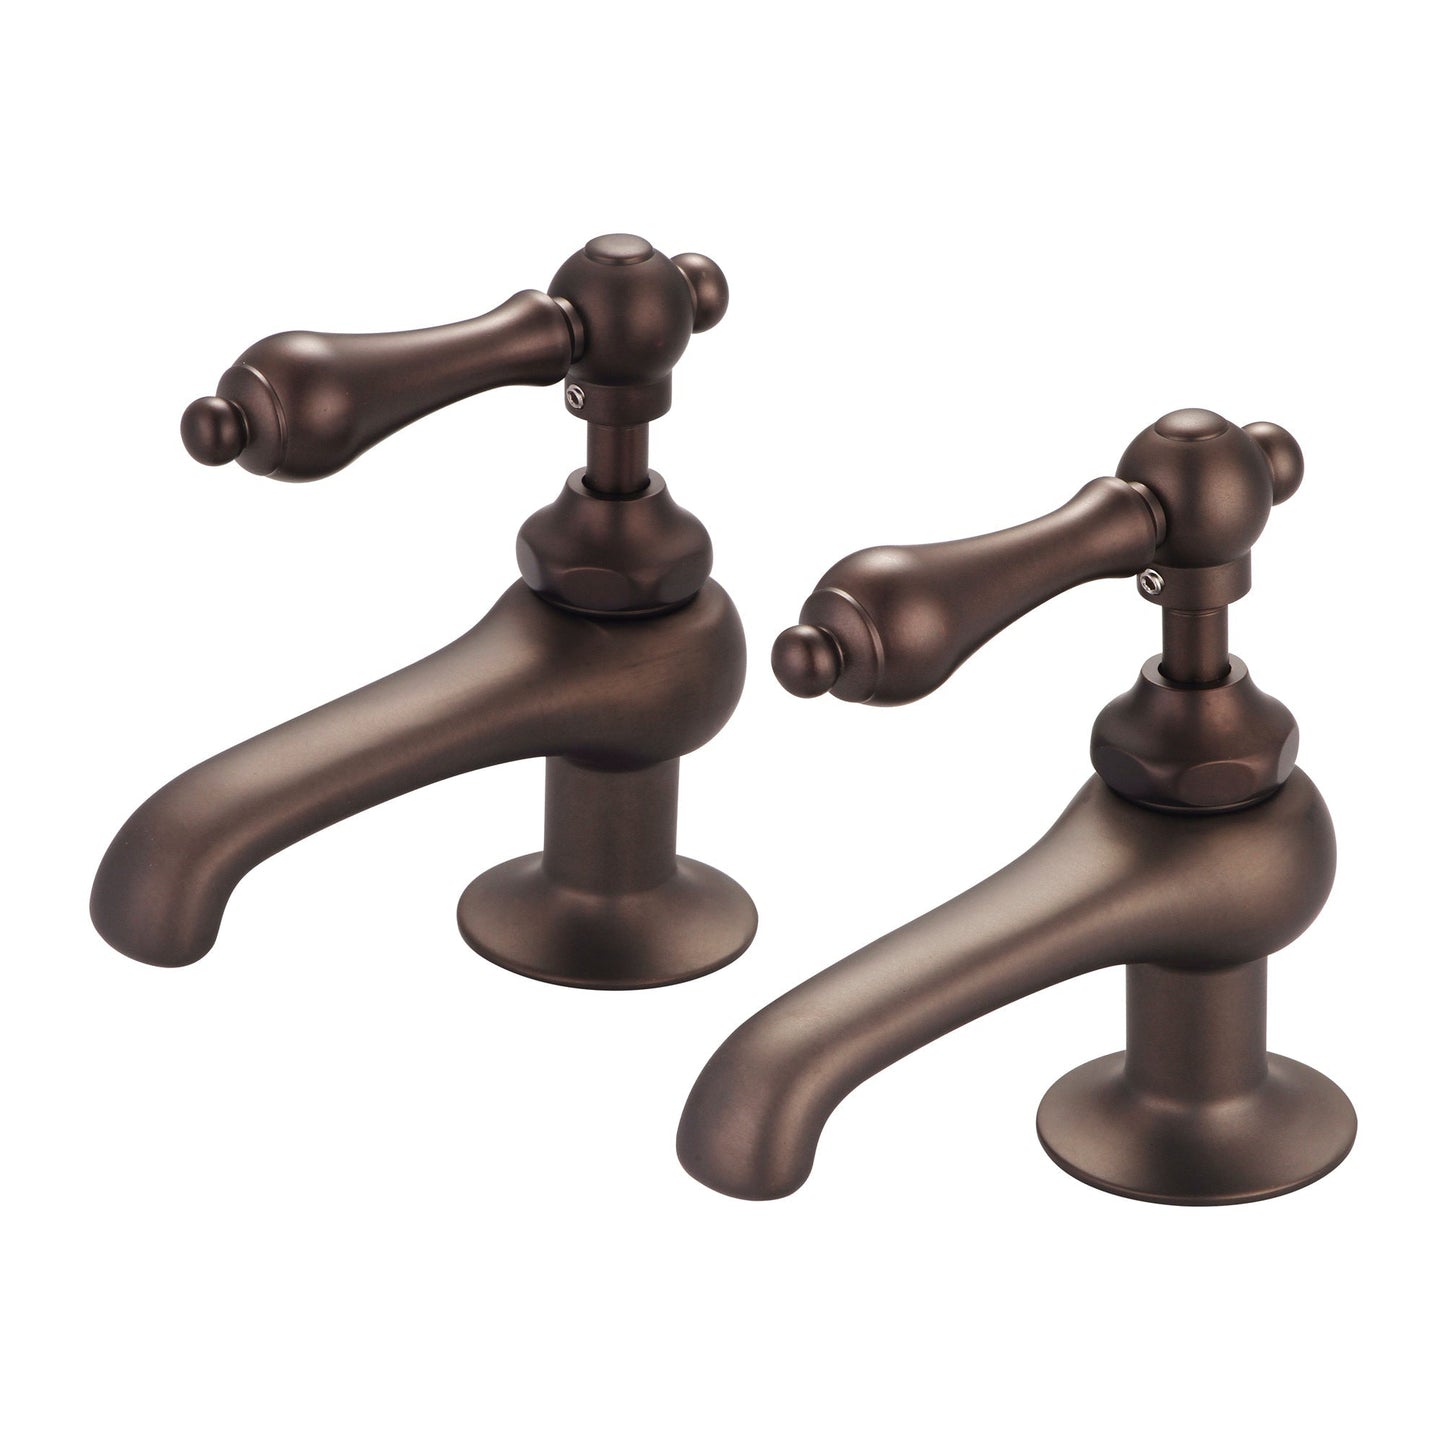 Water Creation Vintage Classic Basin Cocks Lavatory F1-0003 1.88" Brown Solid Brass Faucet With Metal Lever Handles Without Labels